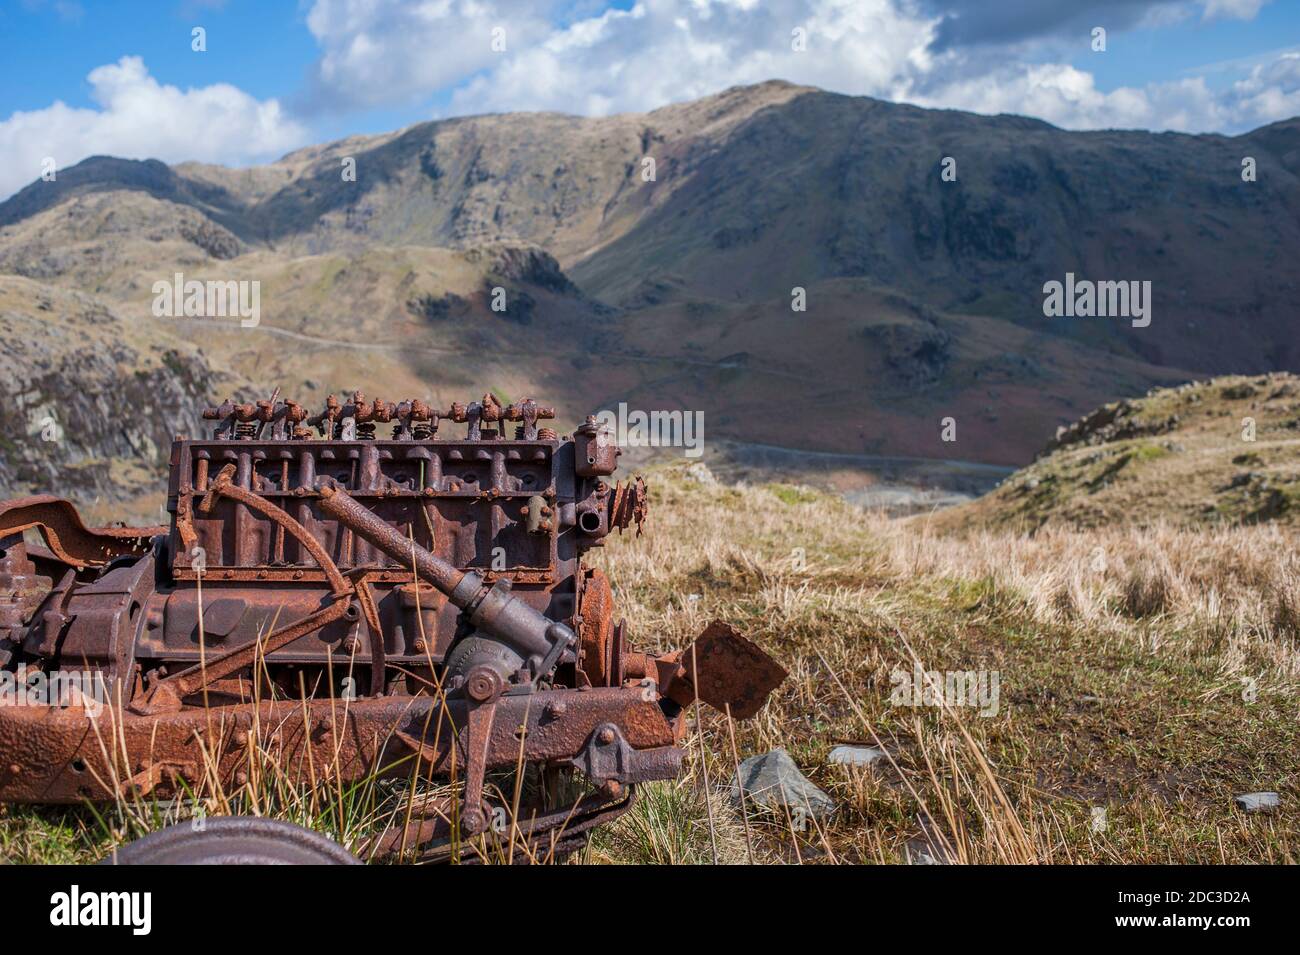 Rusty relic on the side of Coniston Old Man, English Lake District, UK. Stock Photo